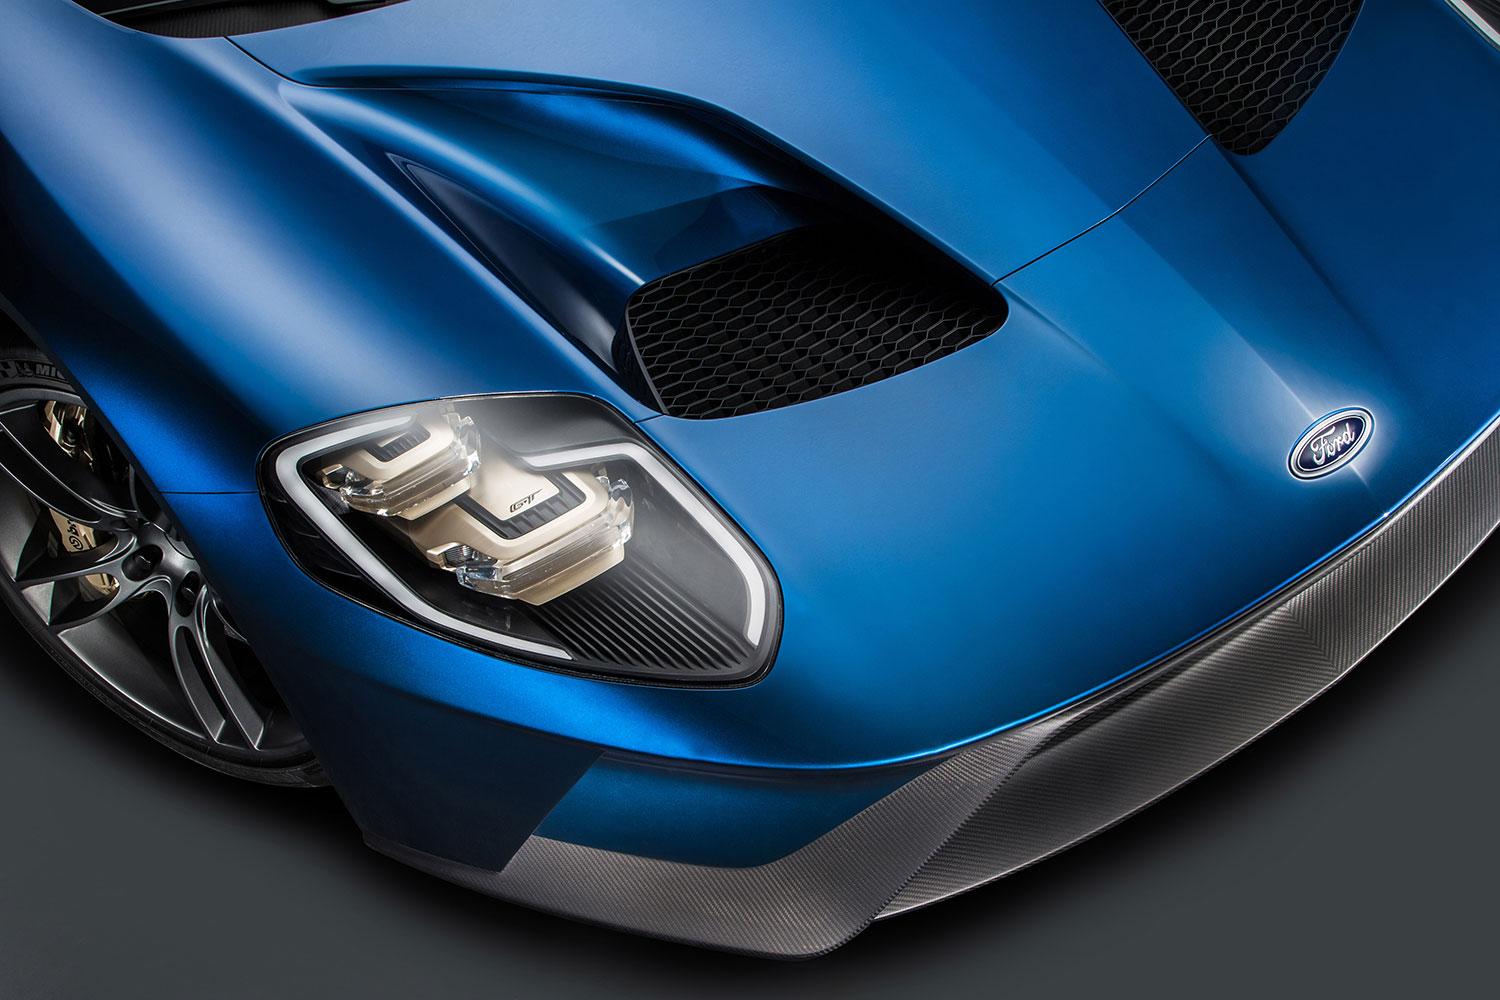 meet the man who sculpted softer side of fords hardcore 2016 gt all newfordgt 24 hr